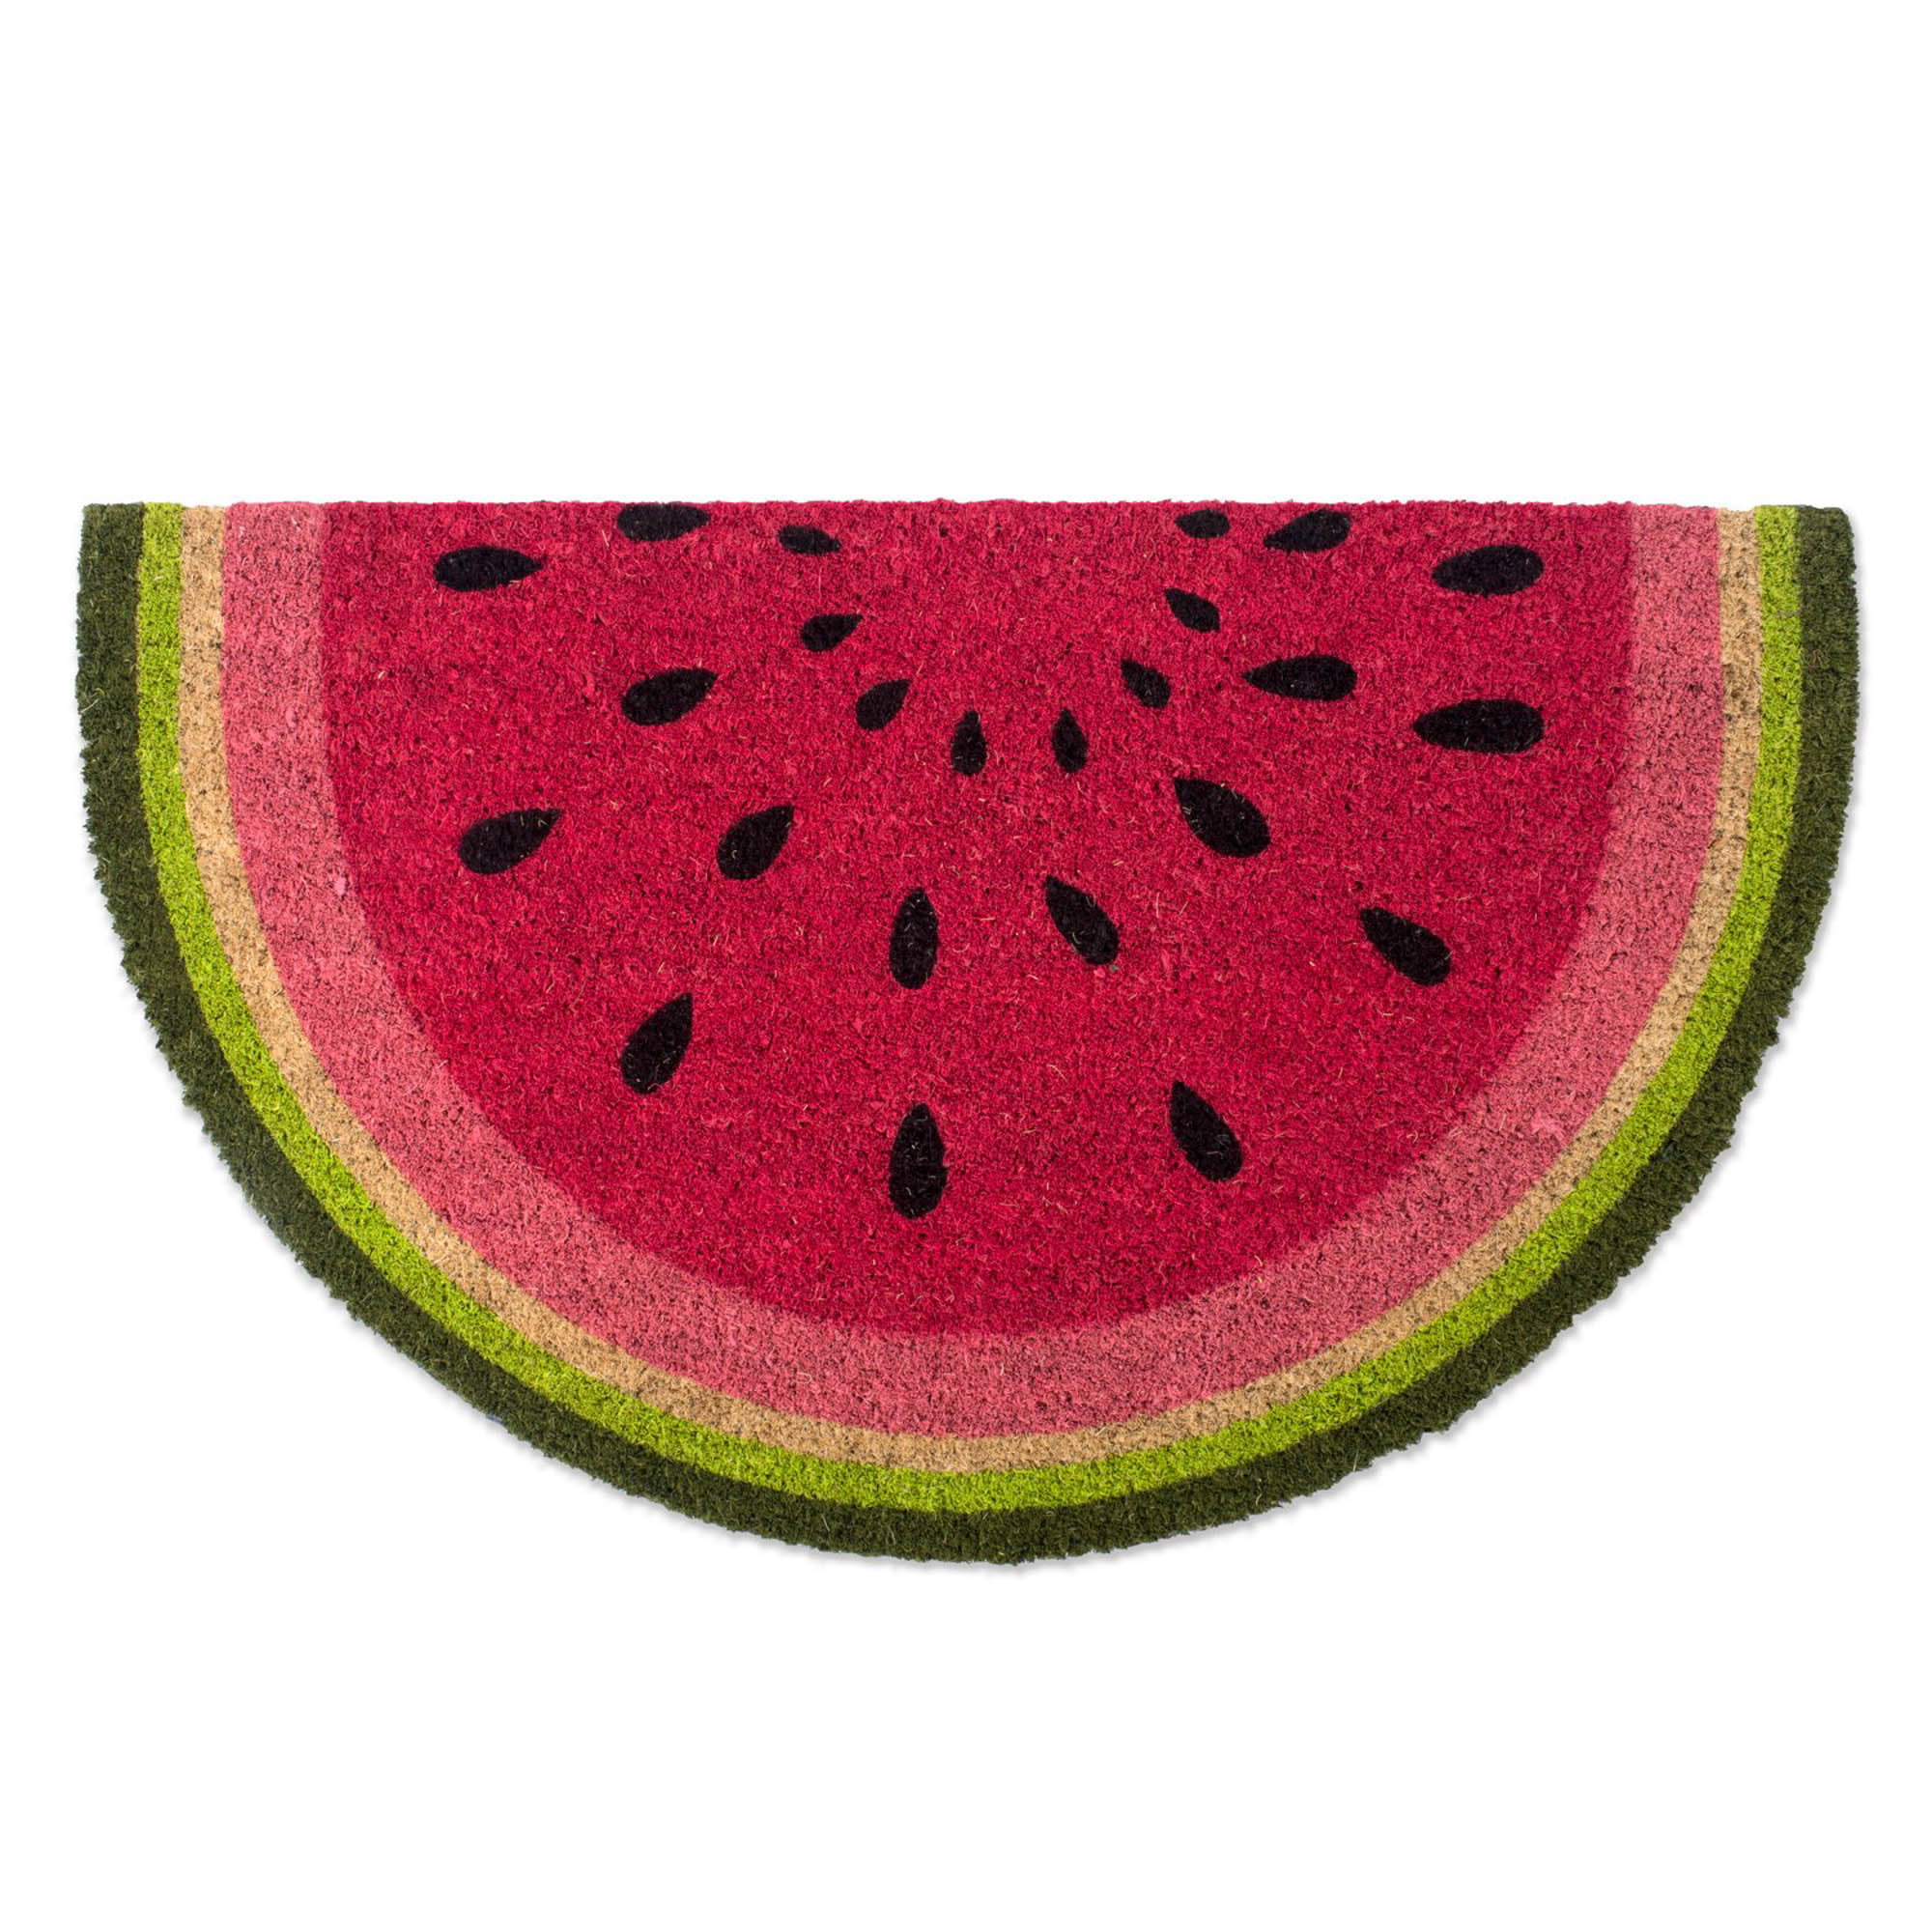 Suitcase Address Label Artistic Watermelon Background with Brushstrokes and a Script for Joyful Summertime Holder Portable Label